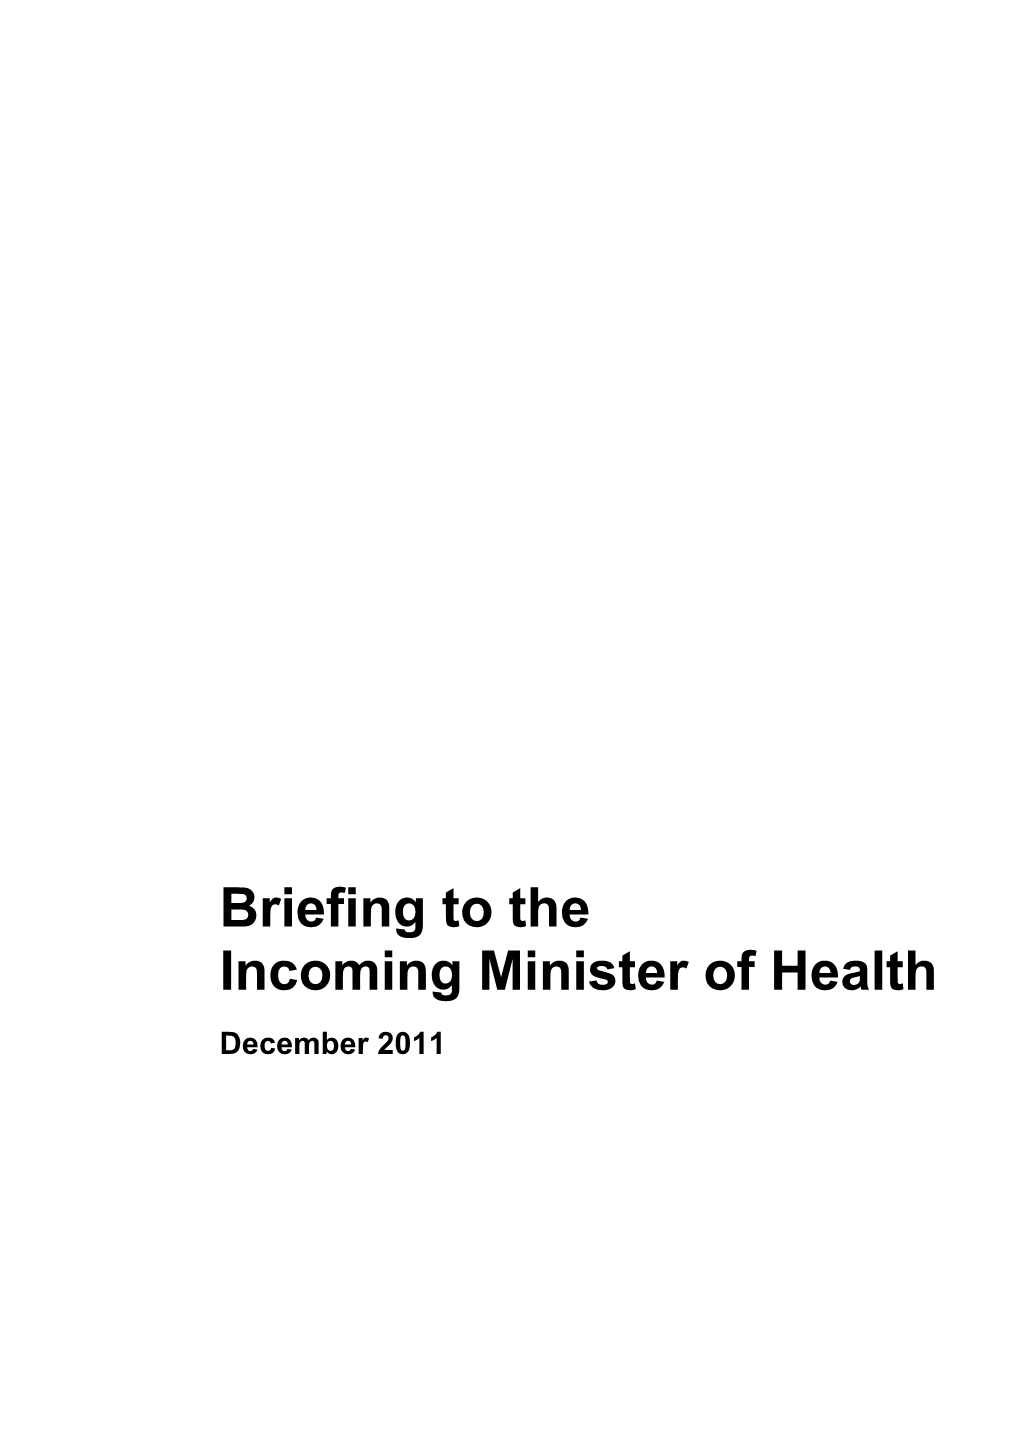 Briefing to the Incoming Minister of Health